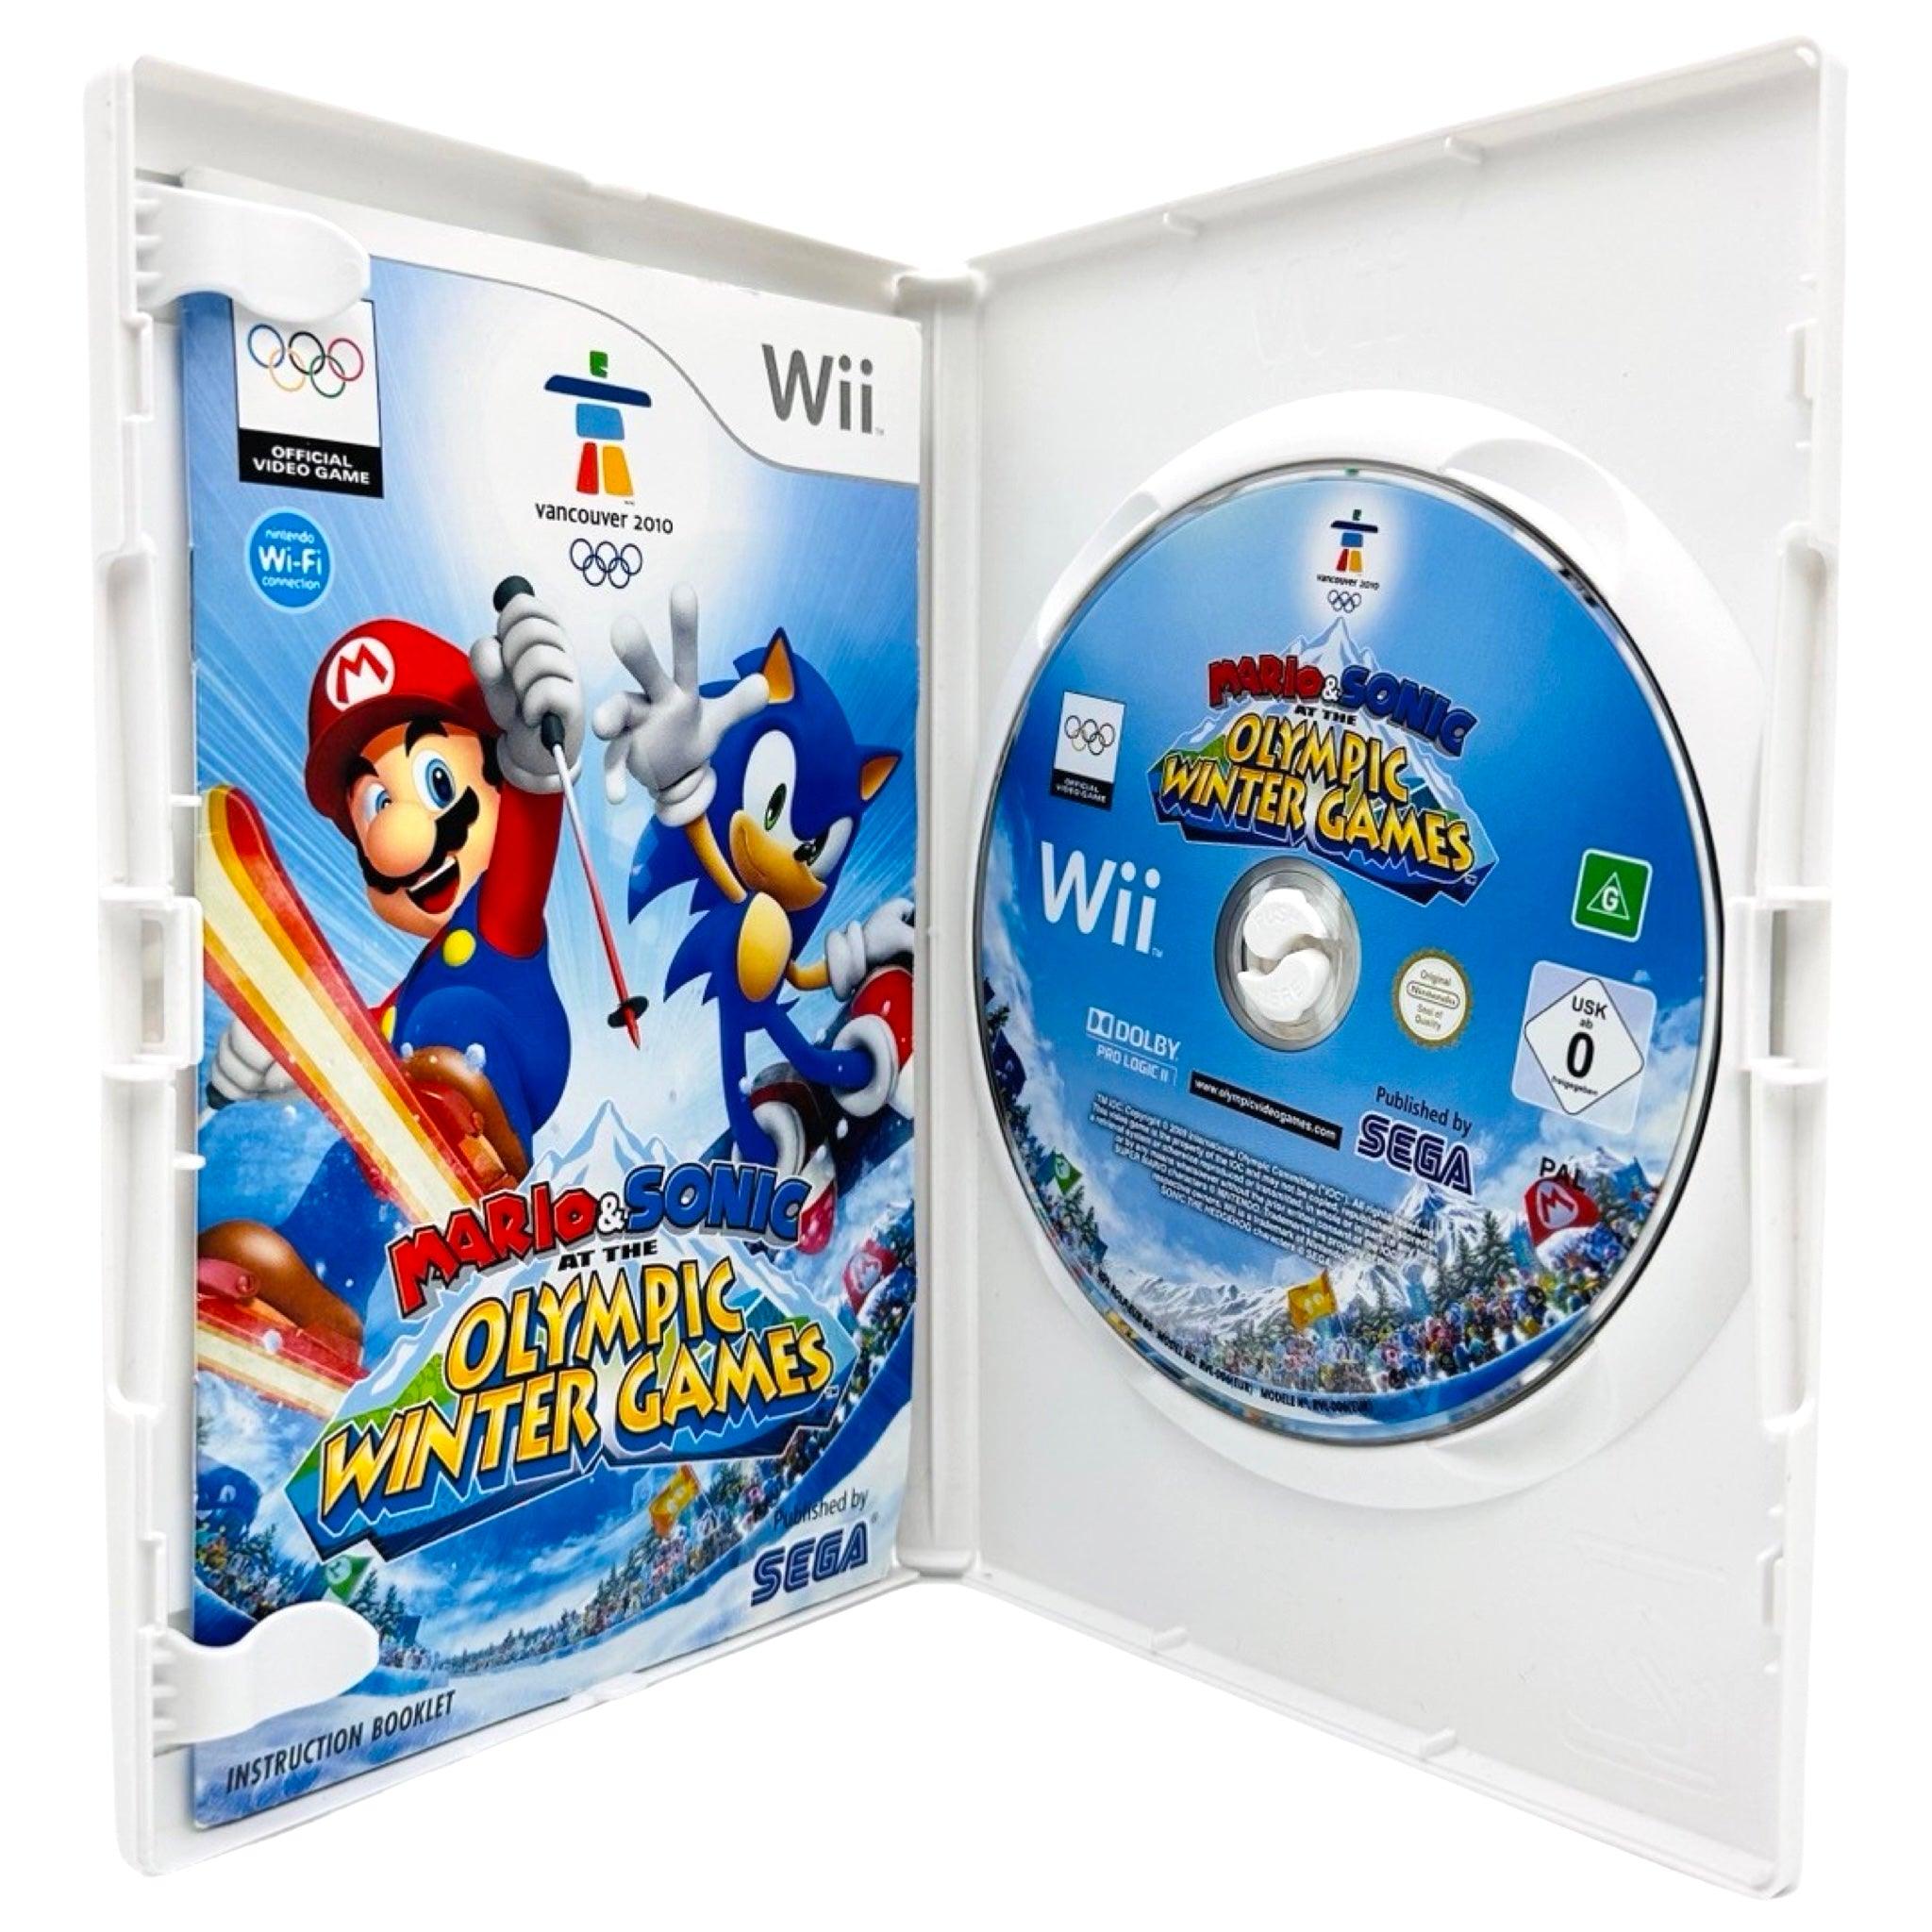 Wii: Mario & Sonic At The Olympic Winter Games - RetroGaming.no